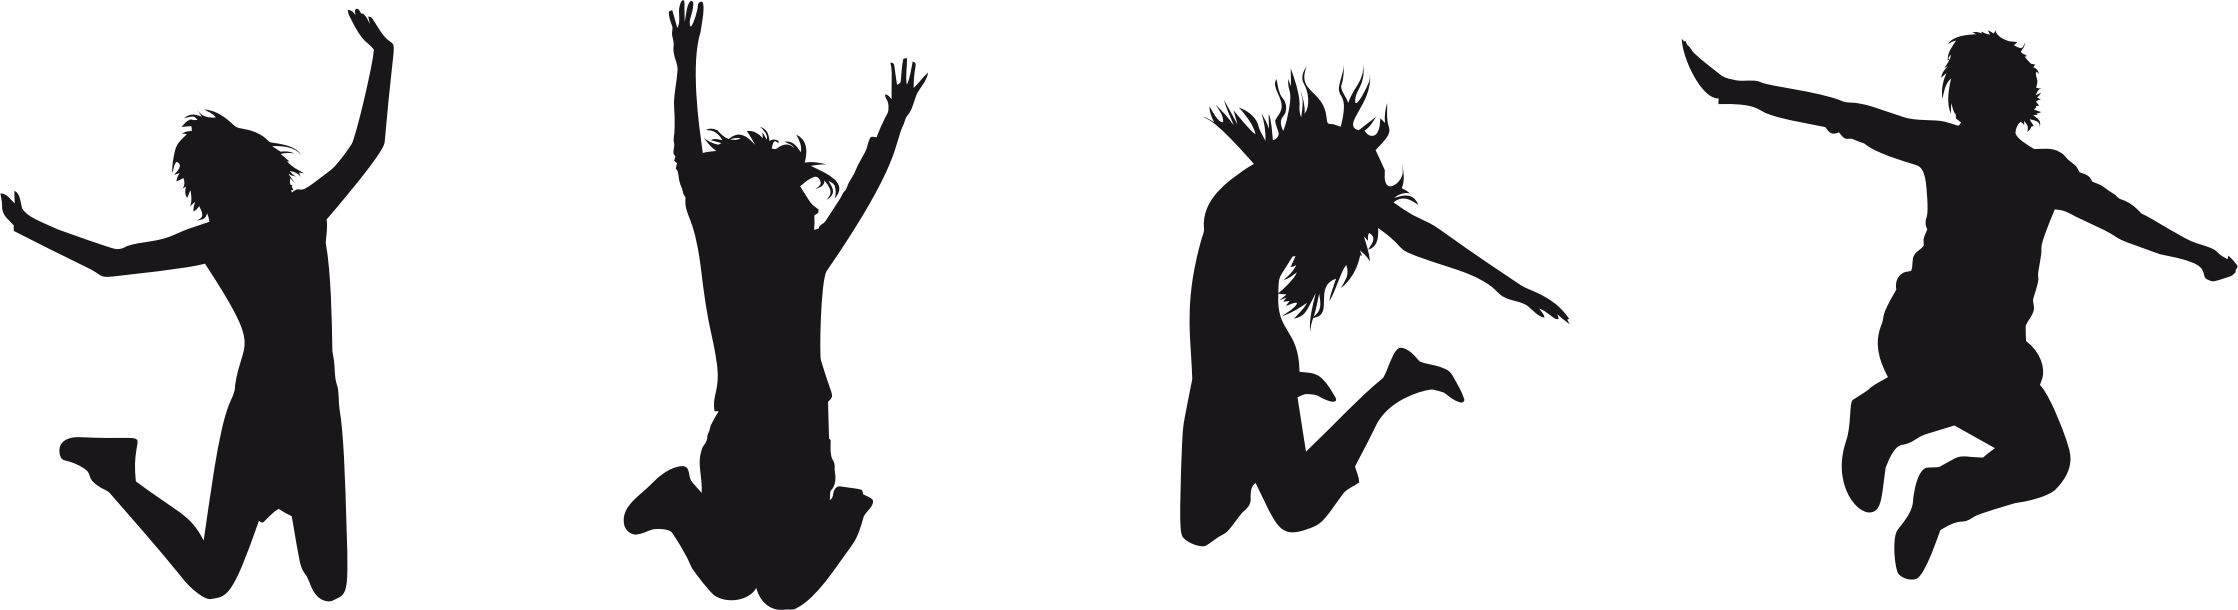 Silhouette at getdrawings com. Jumping clipart feeling good